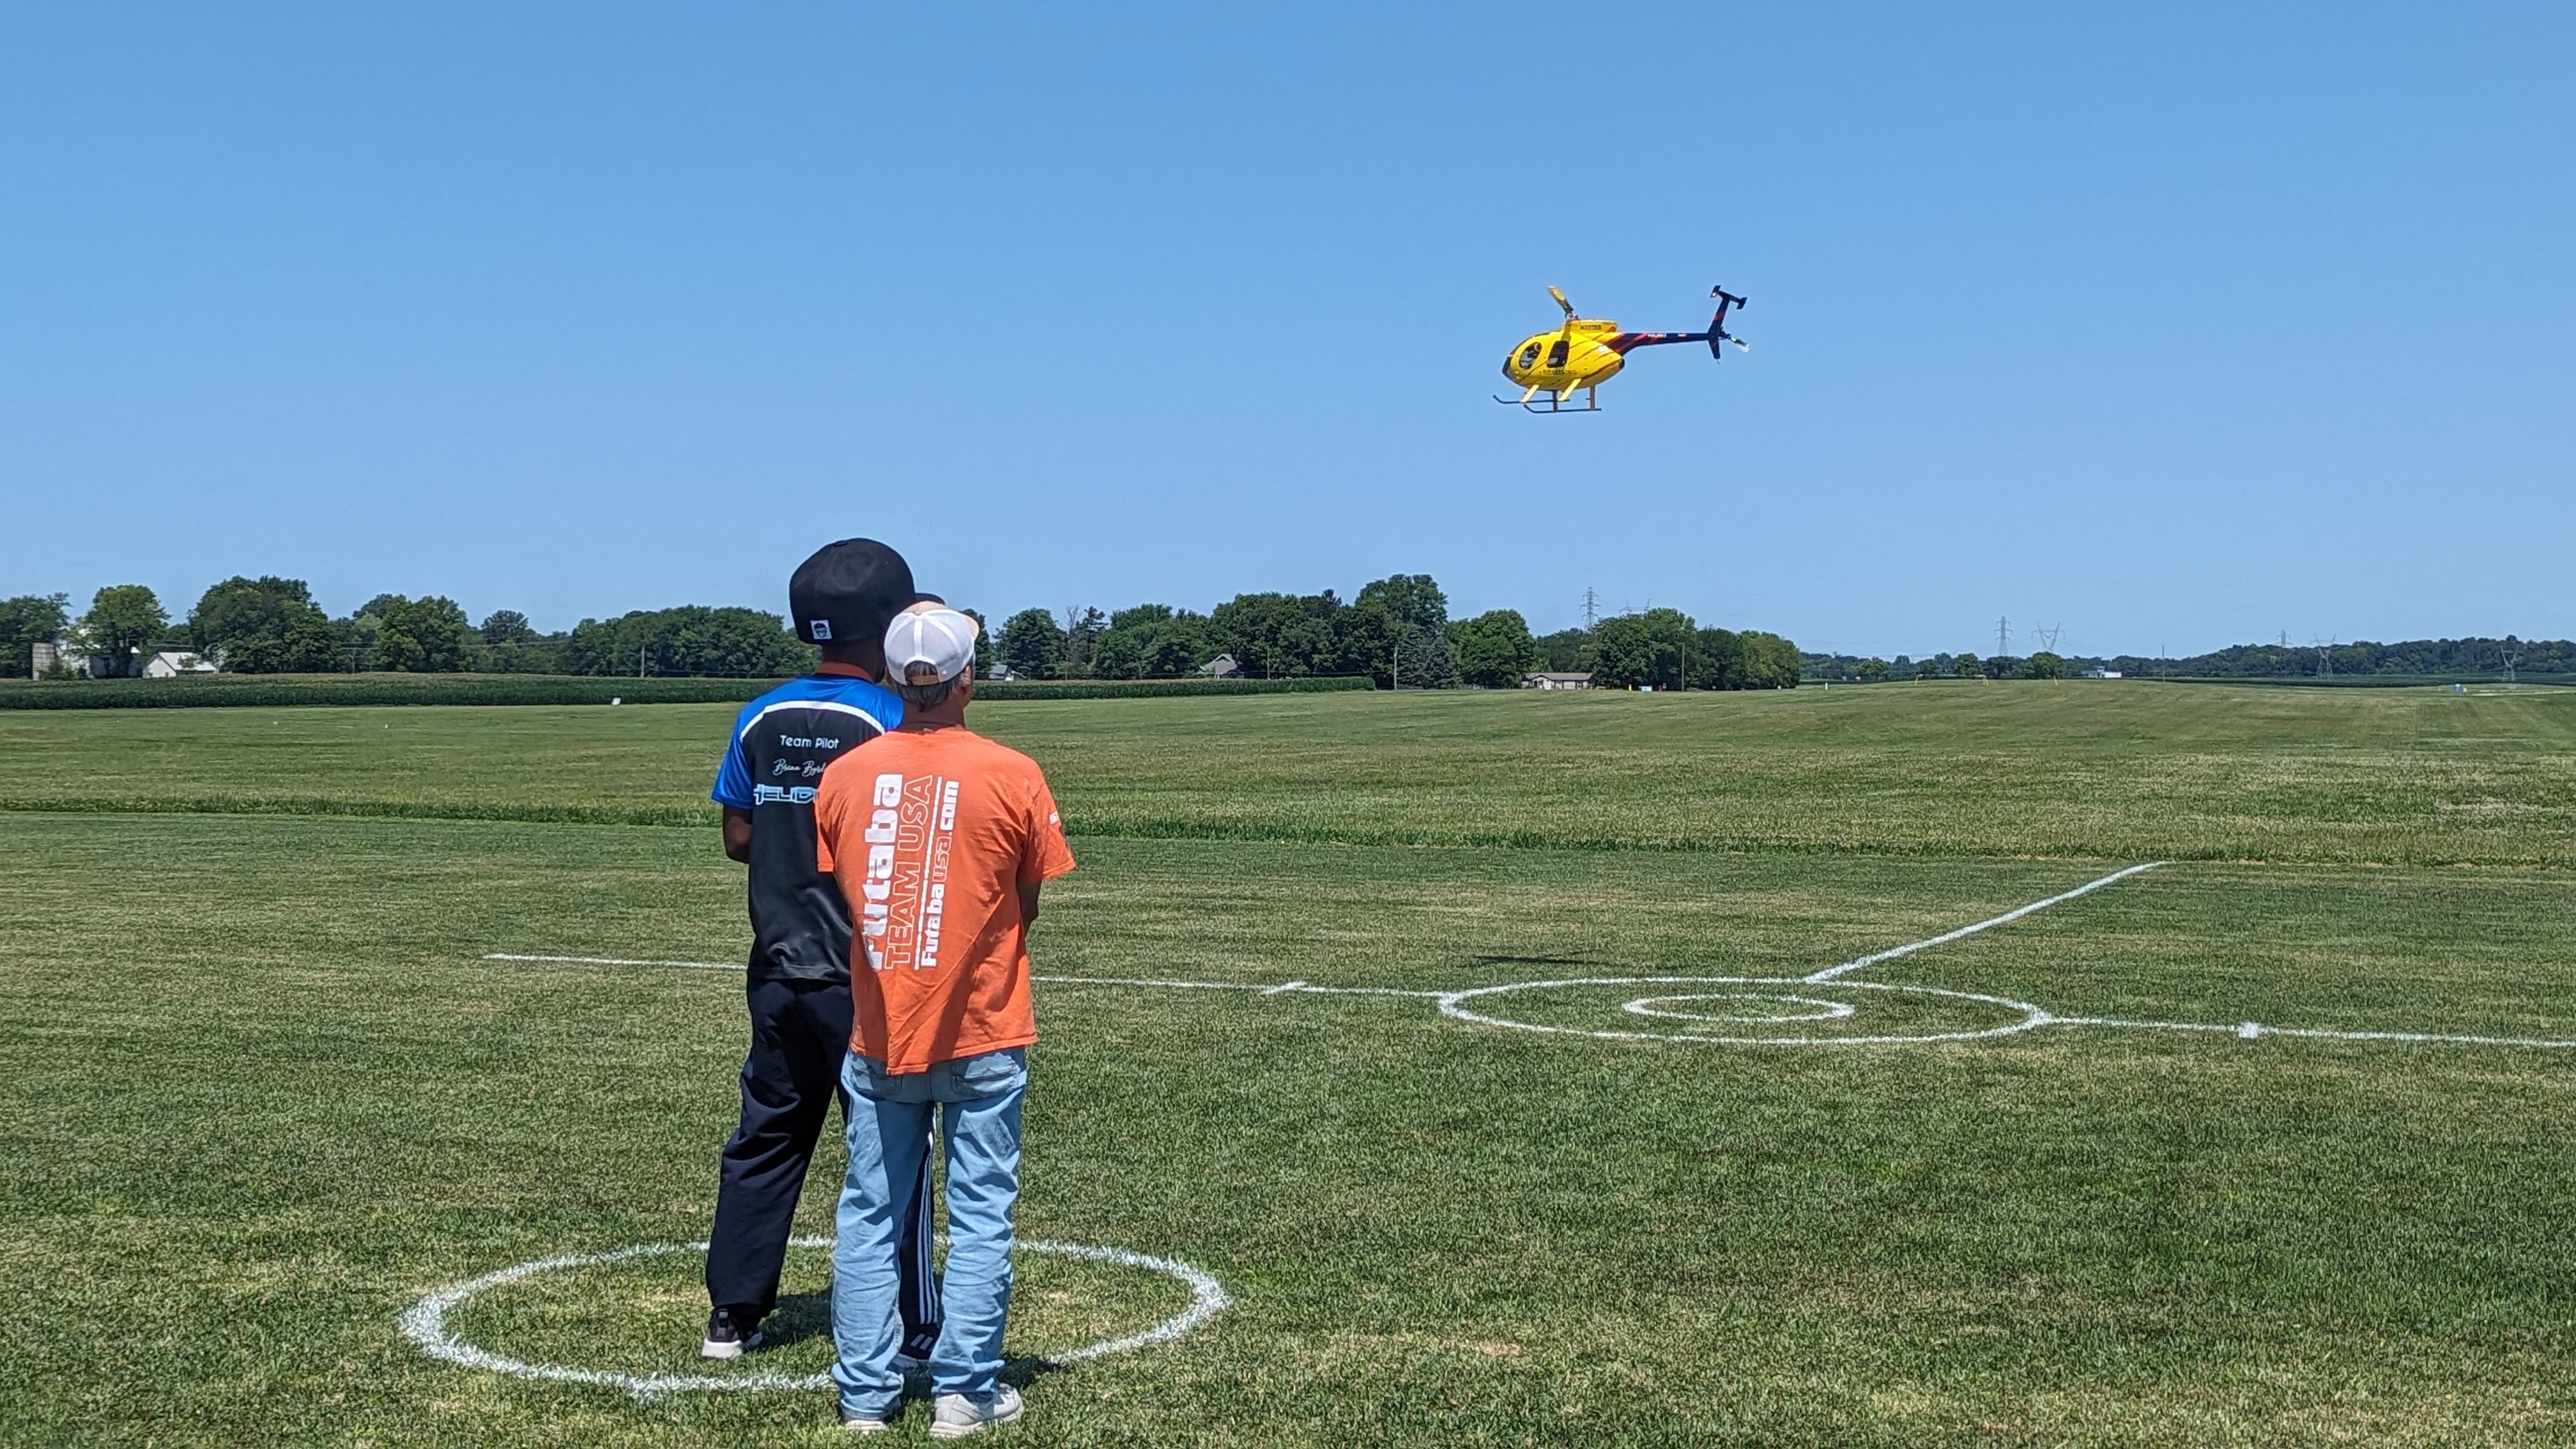 Brian flying his Hughes MD500.